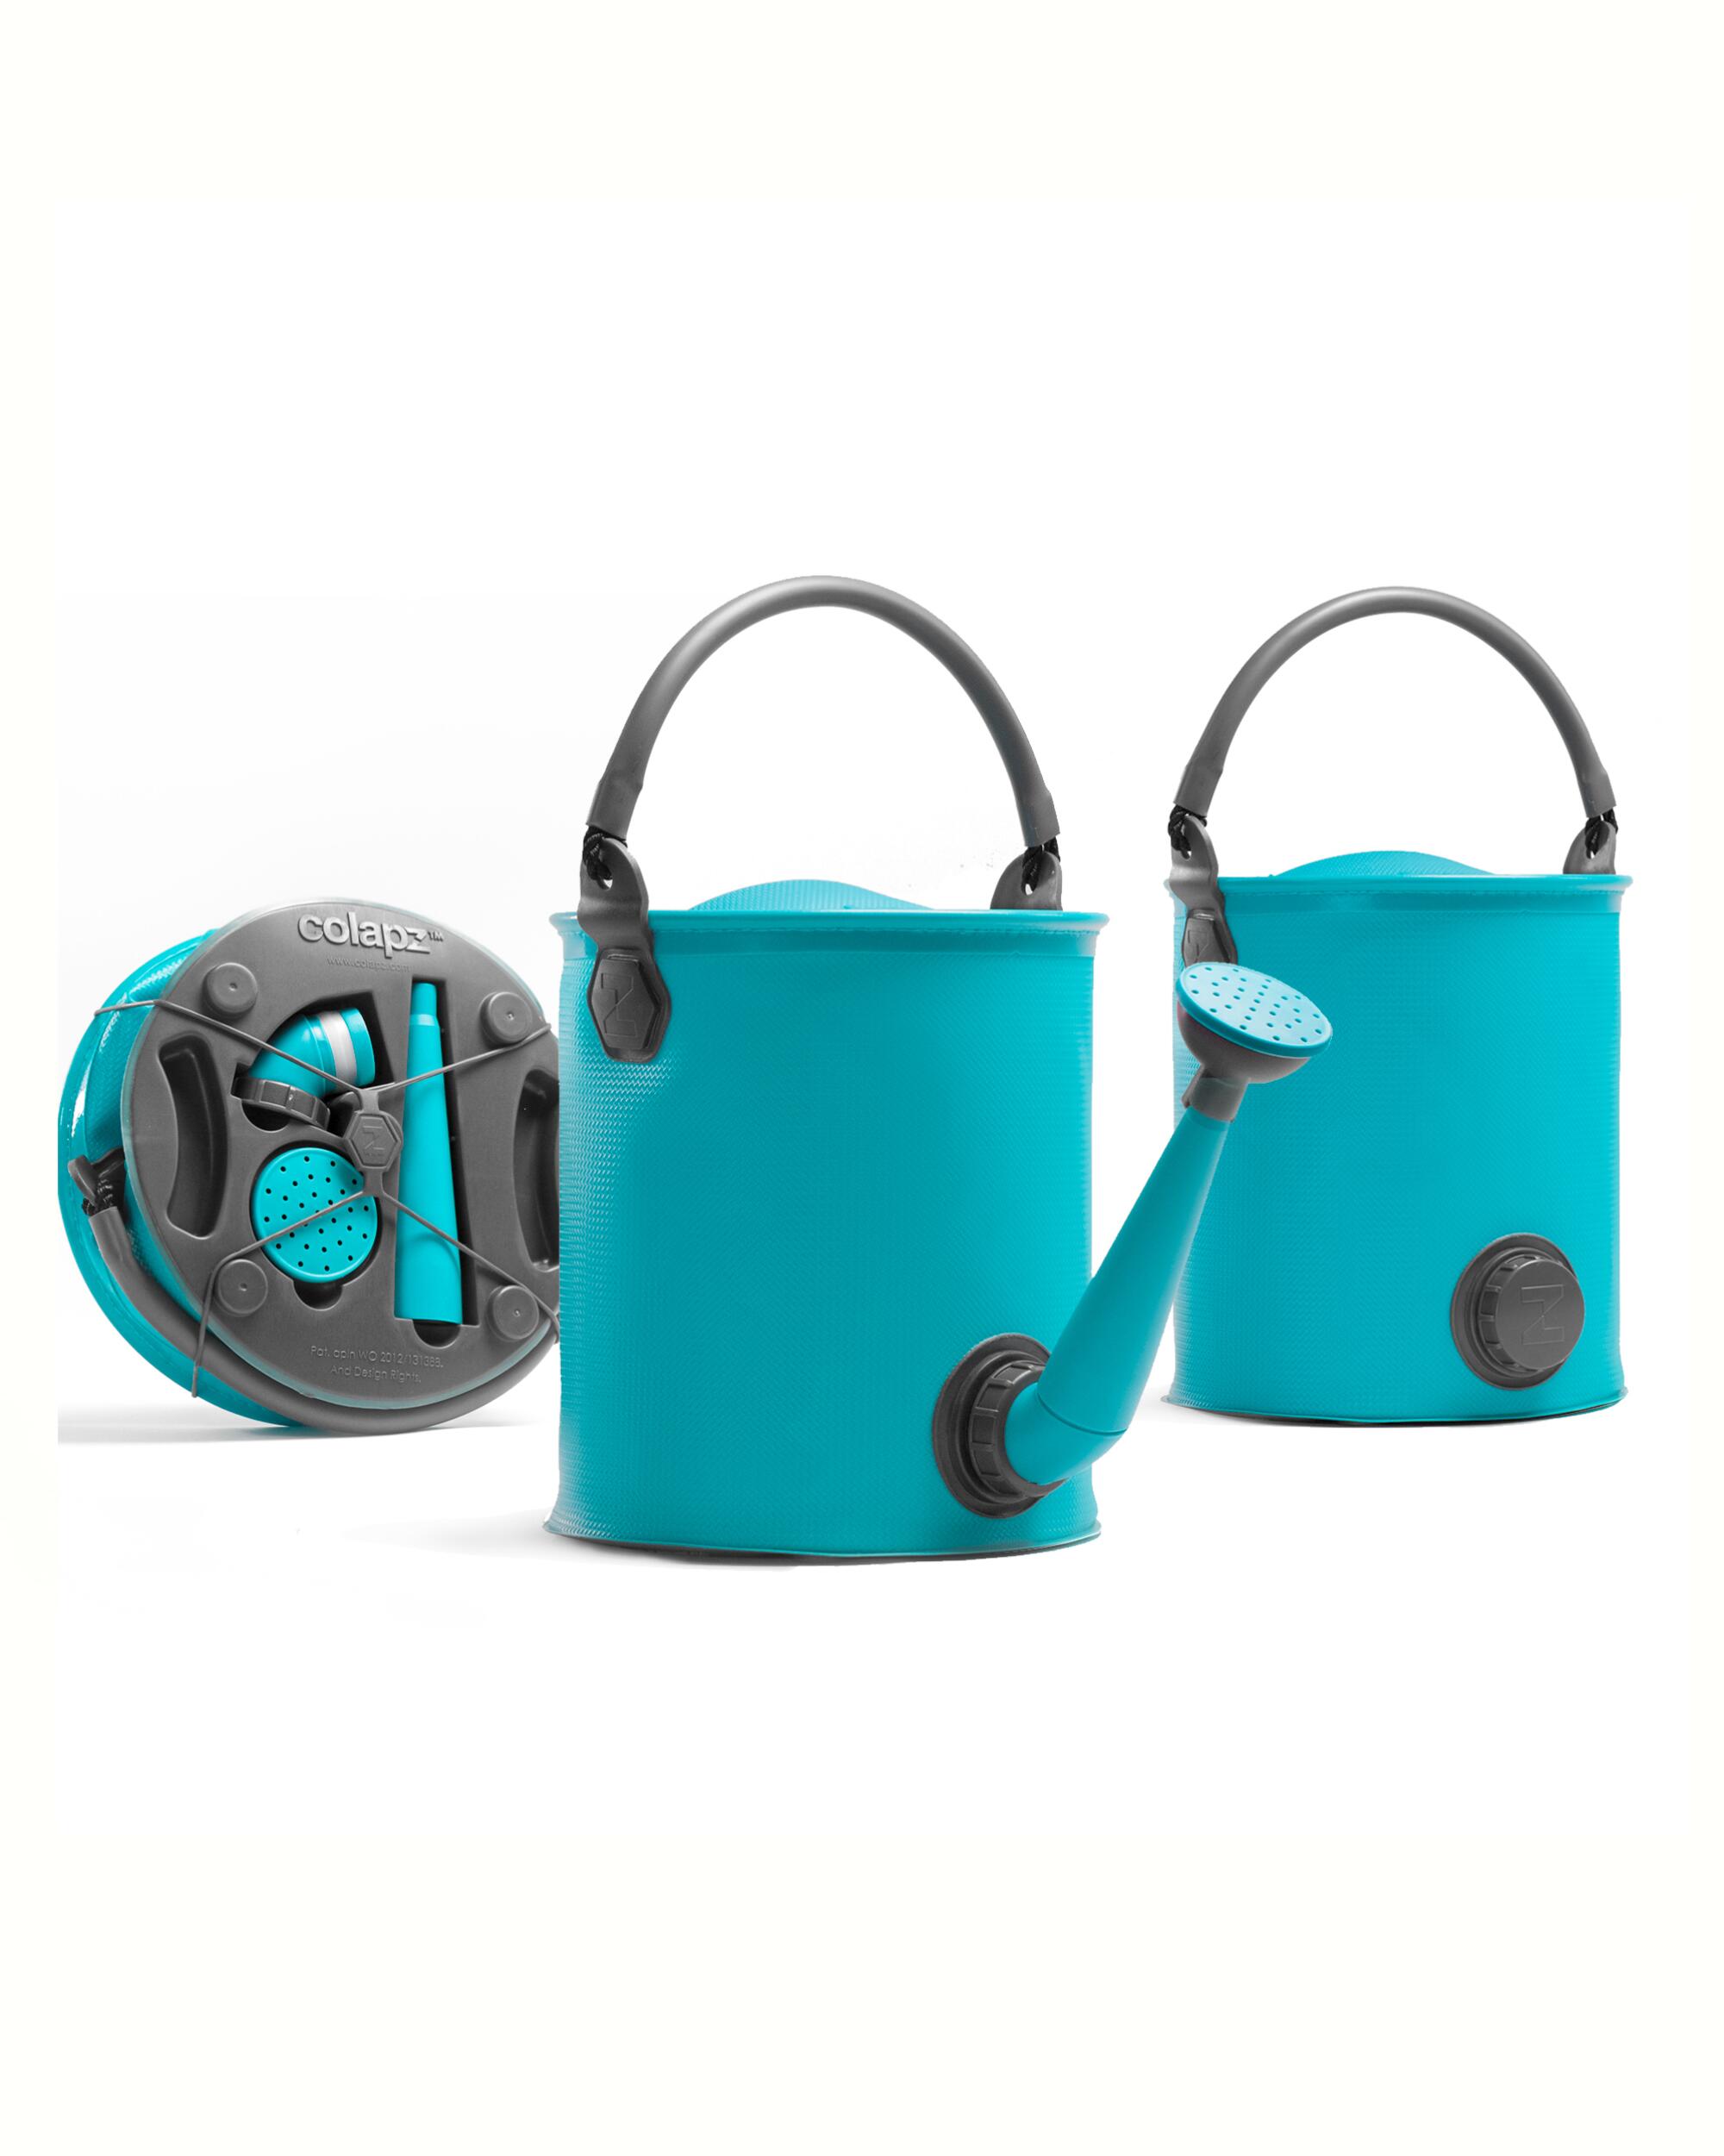 The collapsible 1.5 gallon garden watering can by Colapz